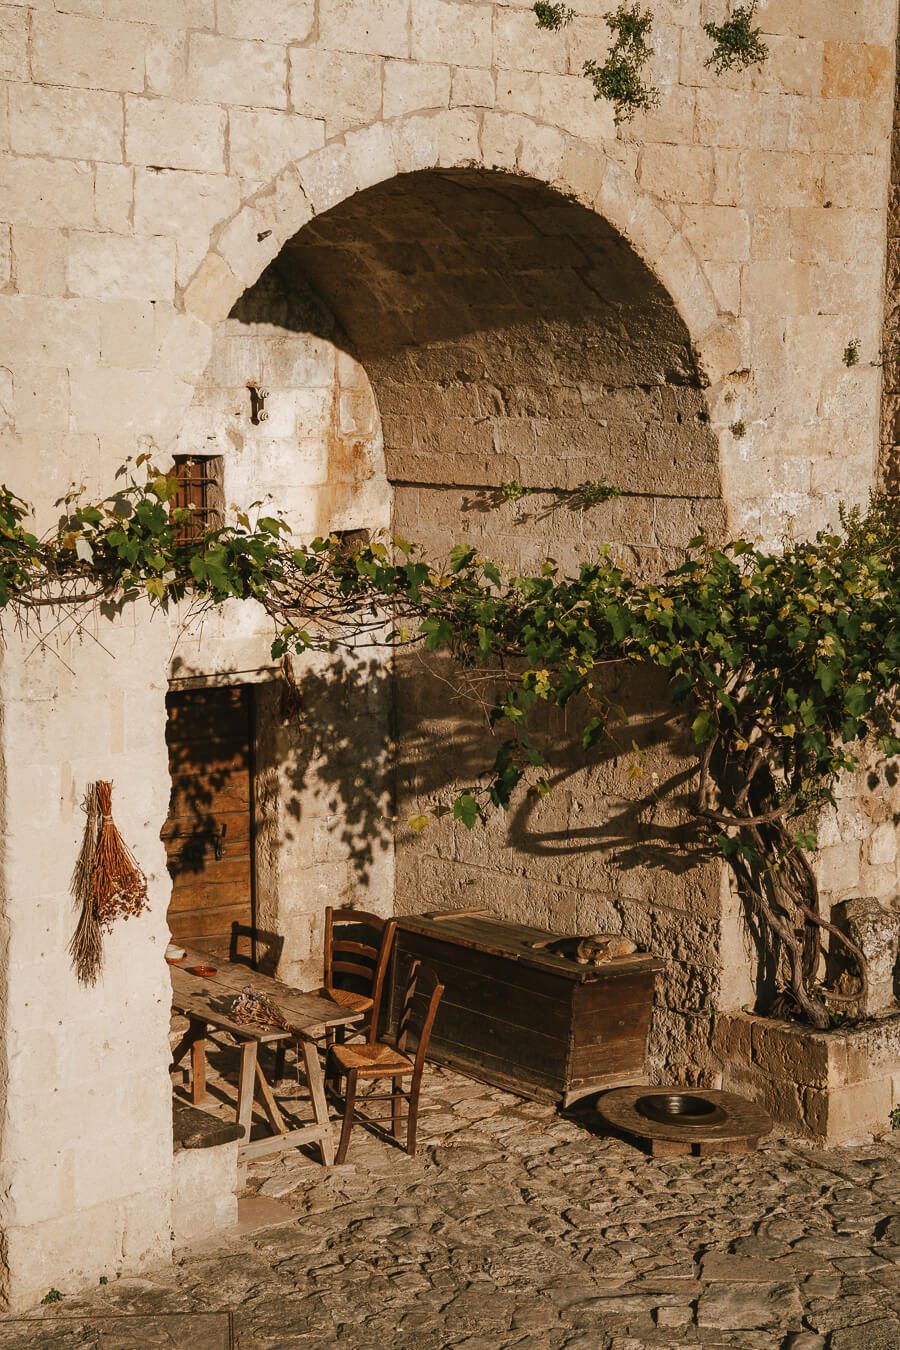 Sextantio Le Grotte Hotel in Matera Italy